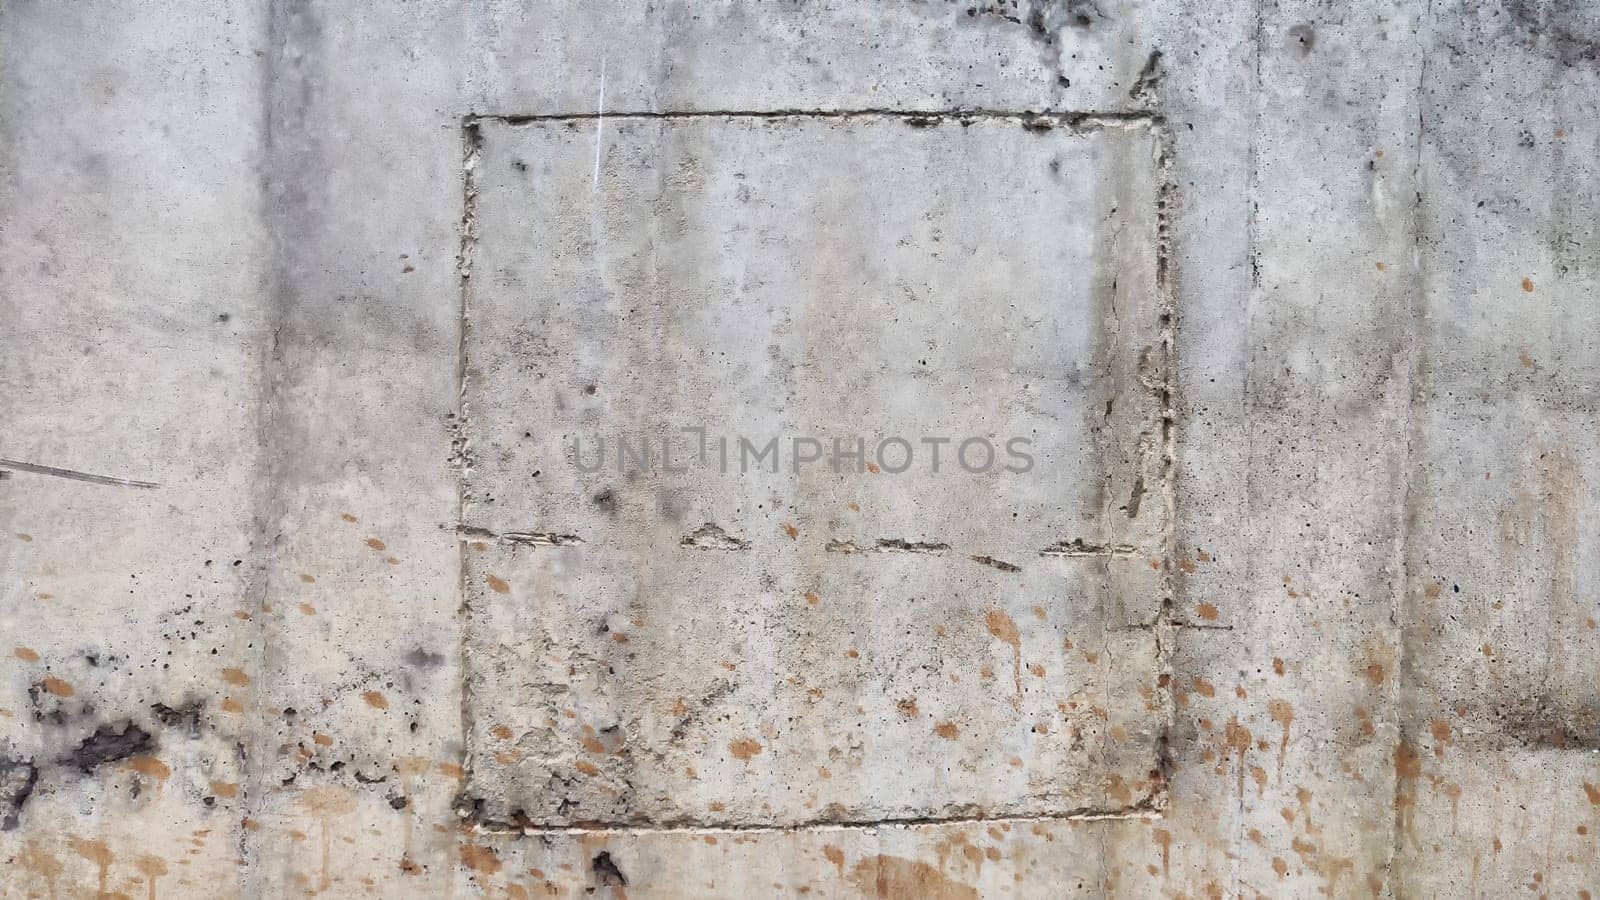 Abstract concrete gray background with dark uneven spots, a square lines as frame and rough texture. Frame and pattern. Copy space